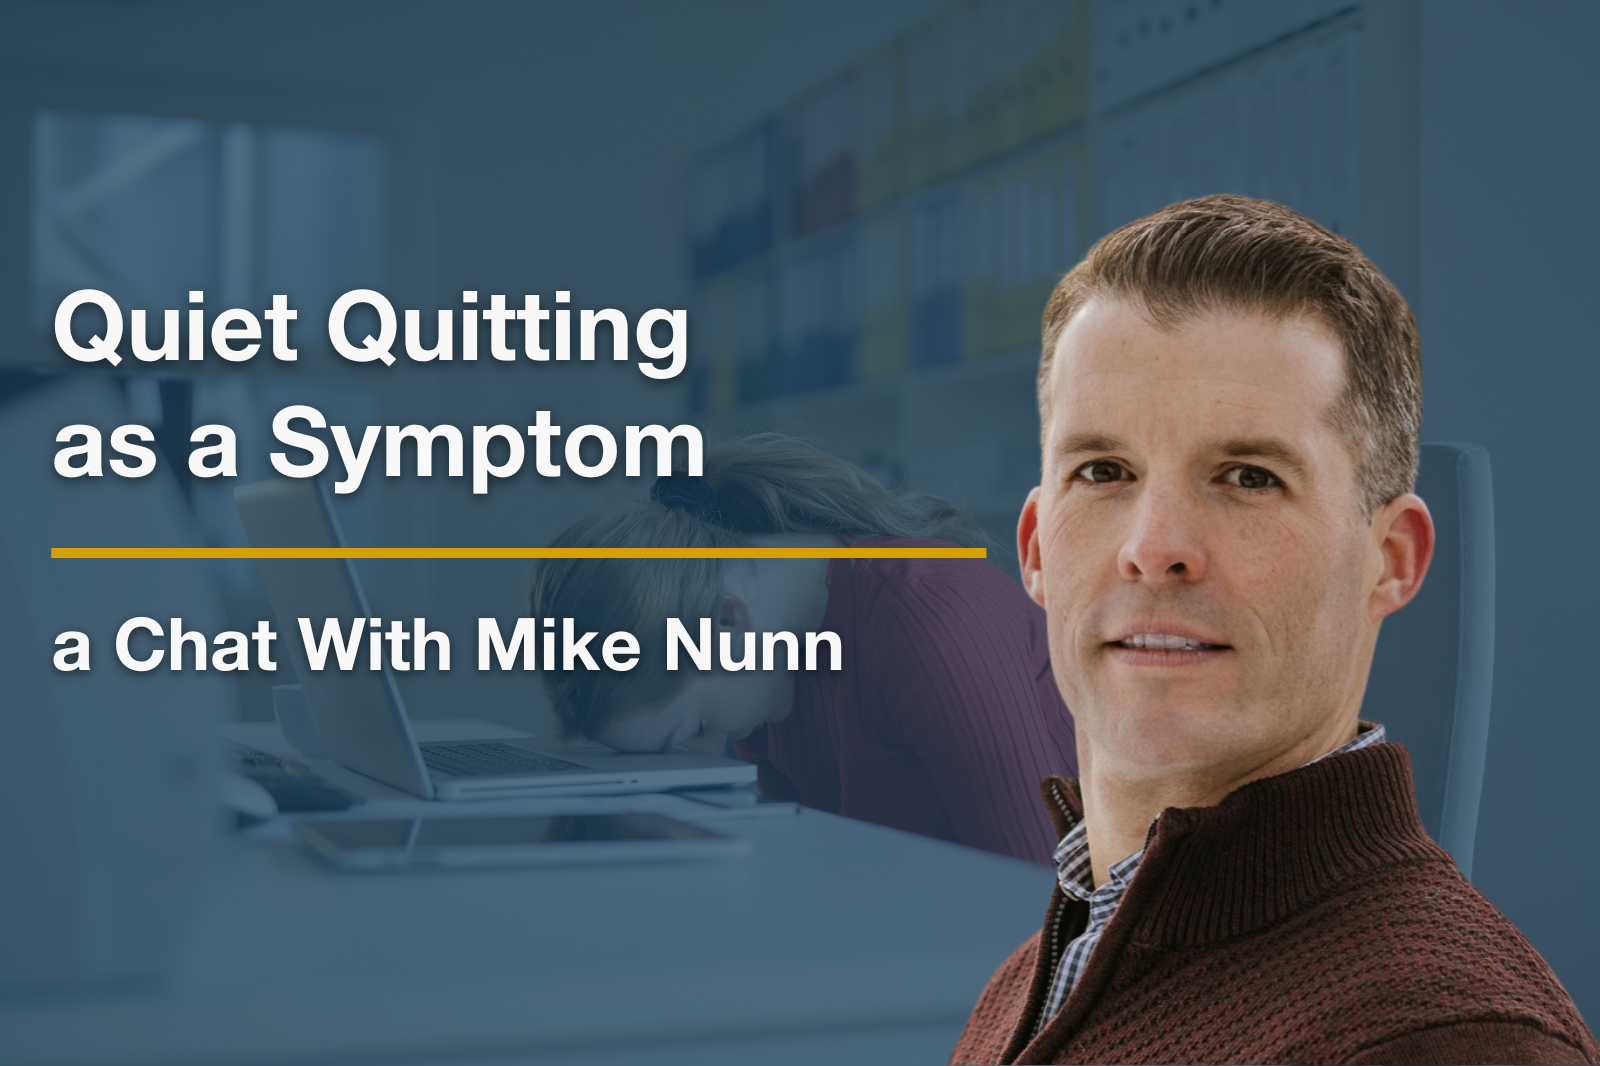 Mike Nunn headshot with text" Quiet Quitting as a sympomt - a chat with Mike Nunn"